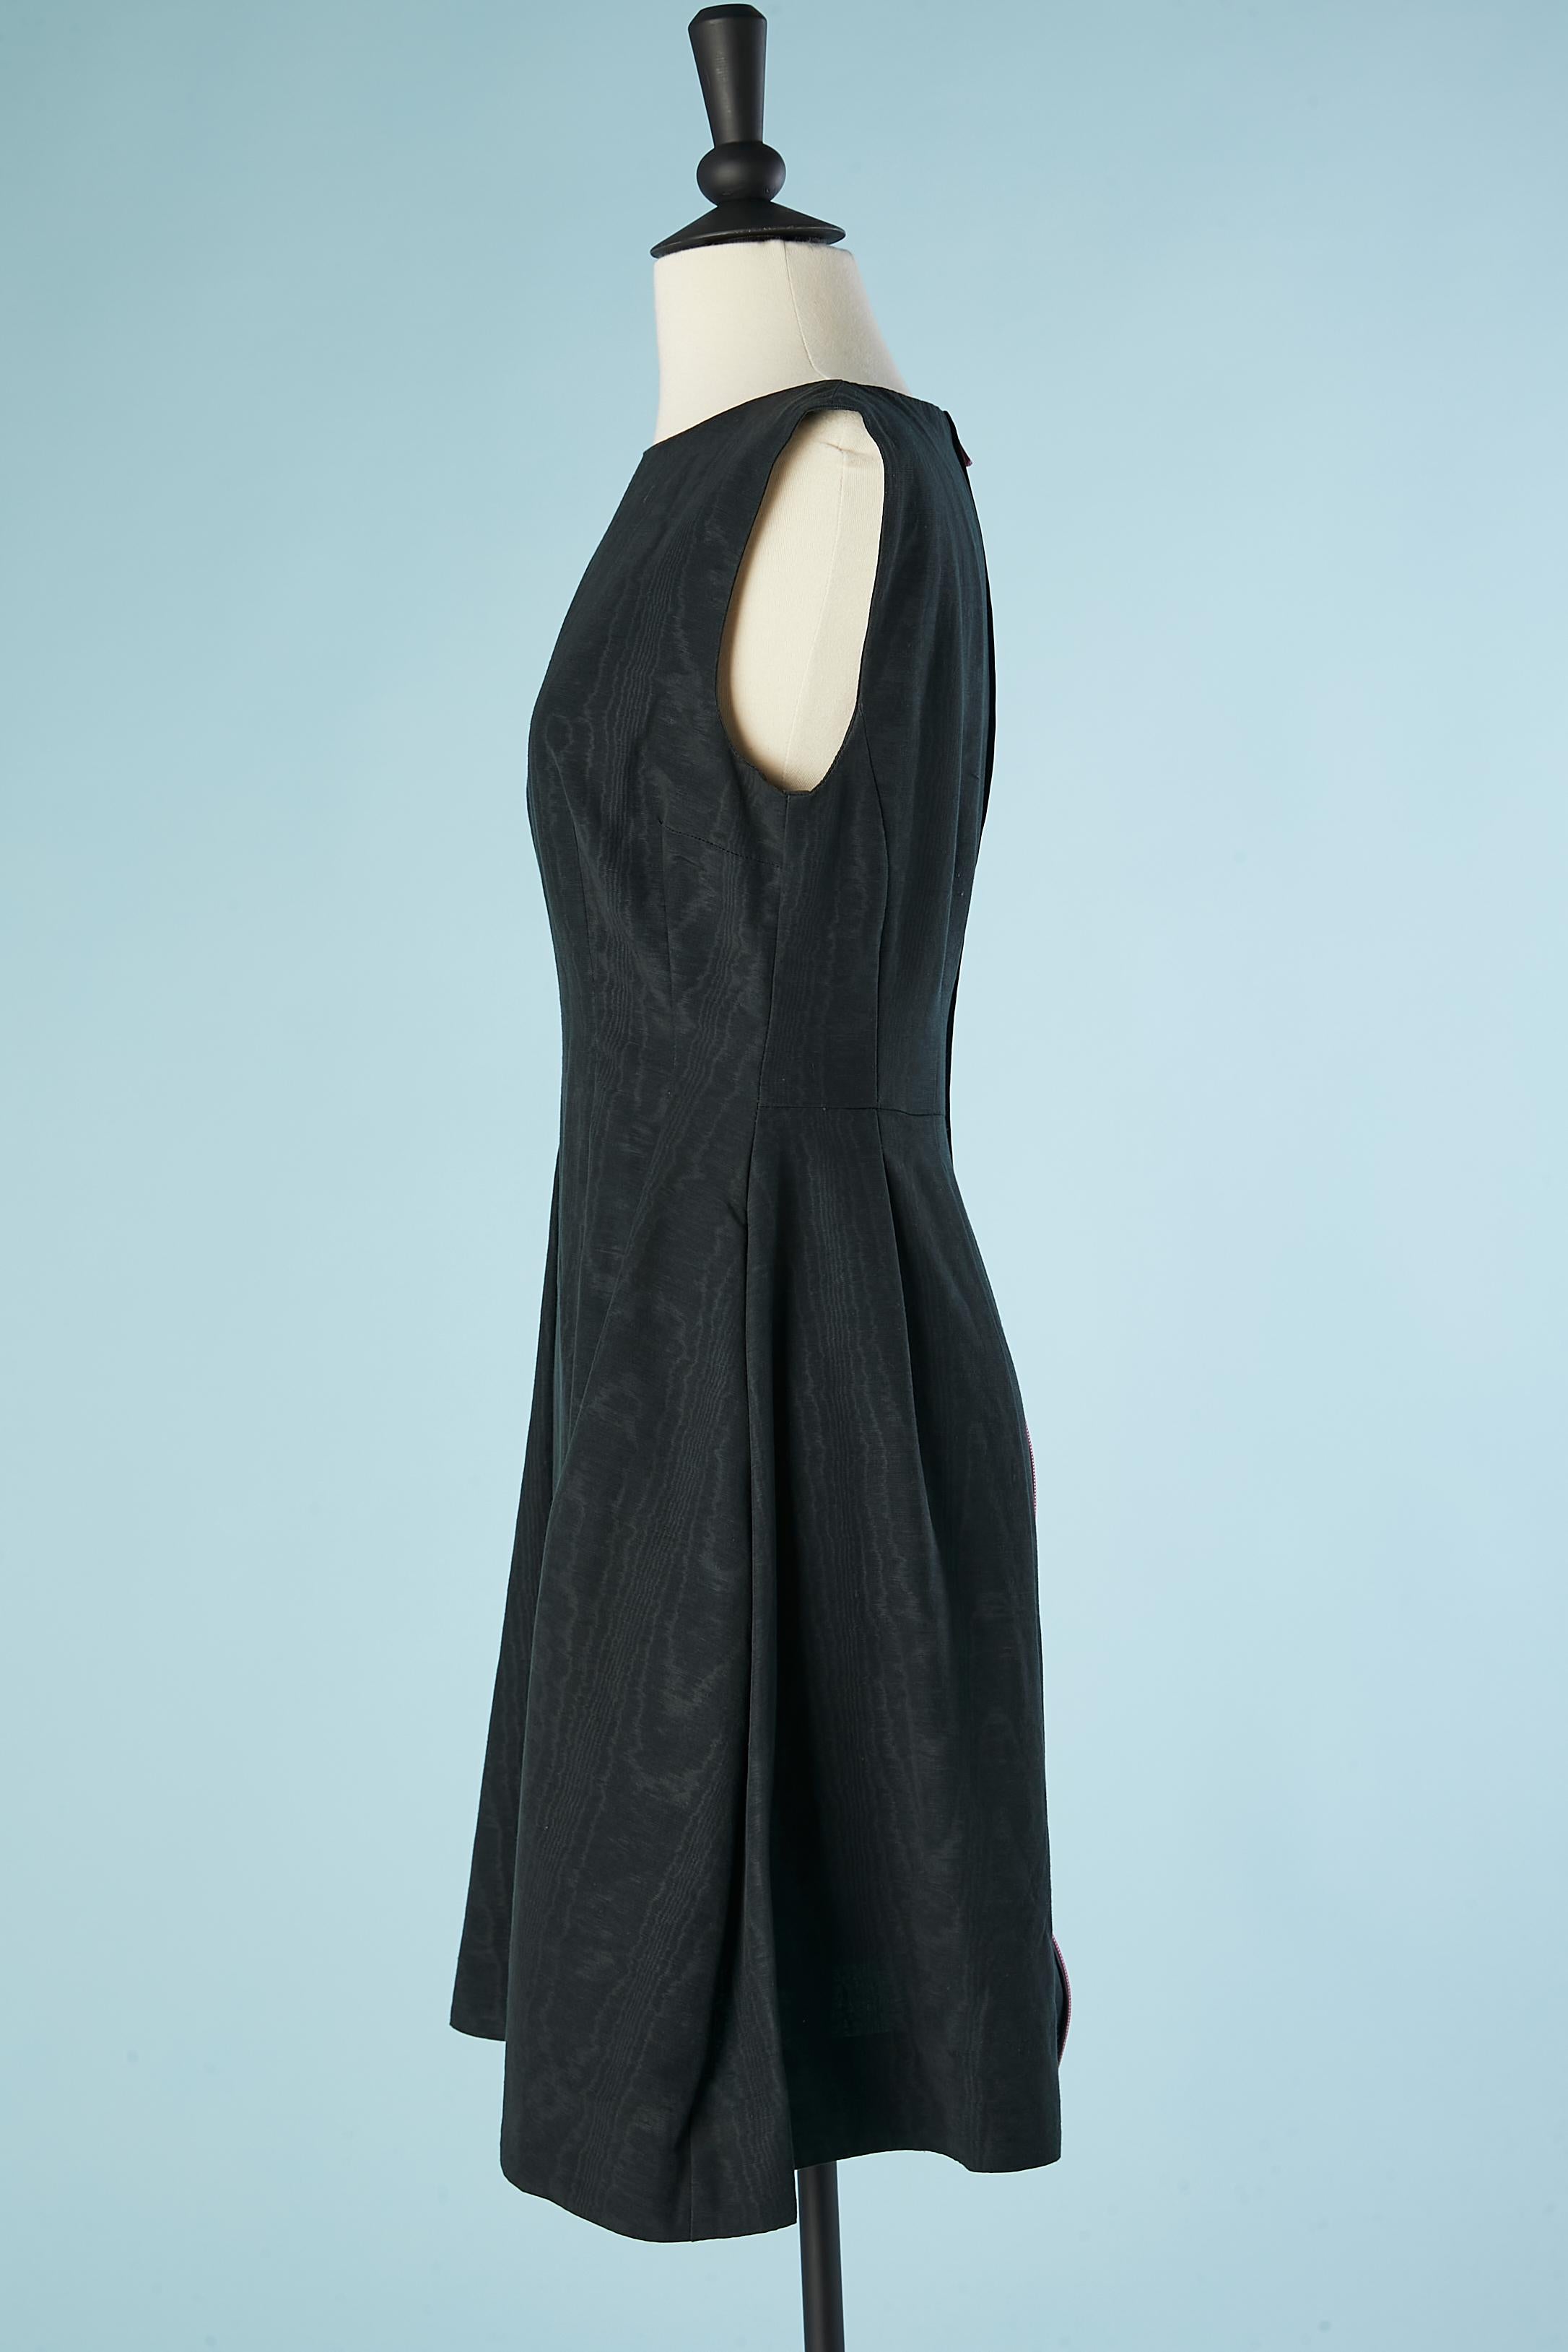 Black moiré cocktail dress  with pink zip in the back McQ Alexander McQueen  In Excellent Condition For Sale In Saint-Ouen-Sur-Seine, FR